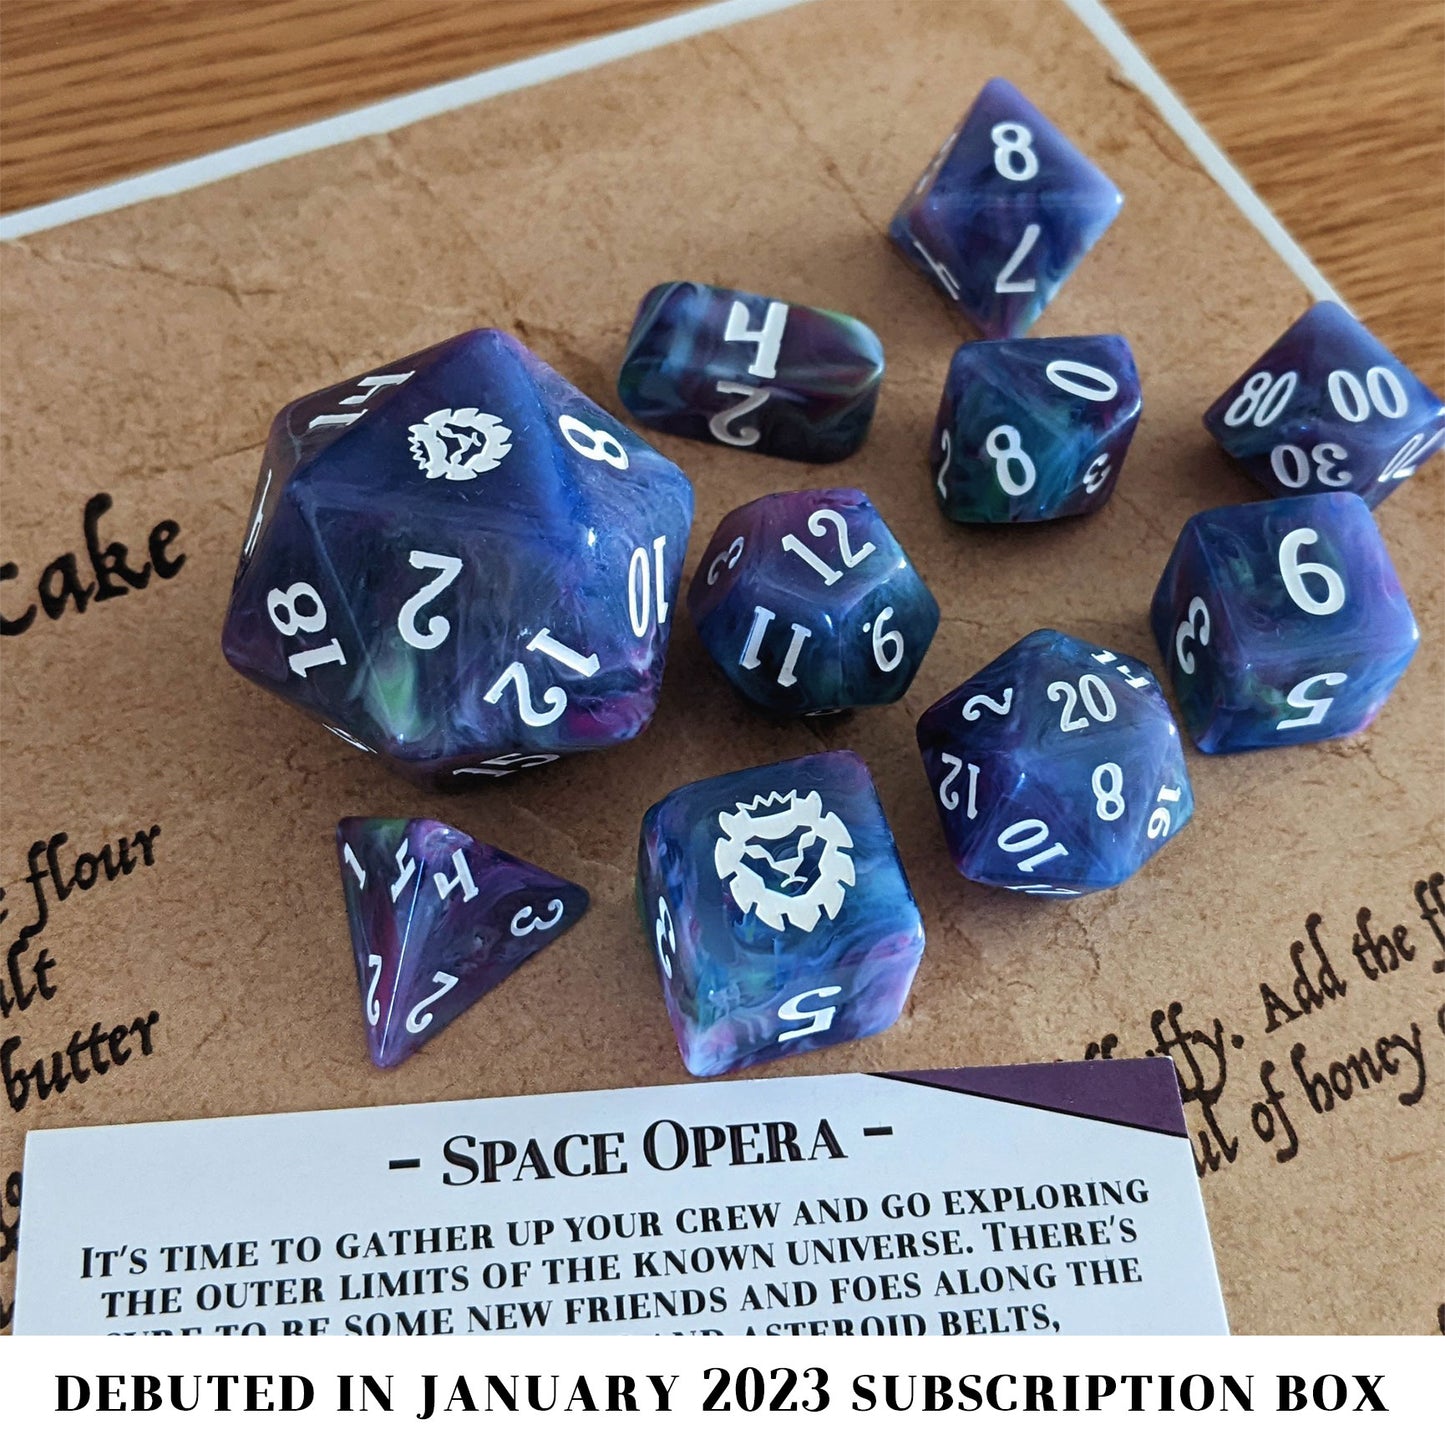 Space Opera is a 10-piece set of swirled purple, green, and blue resin, inked in starry white.